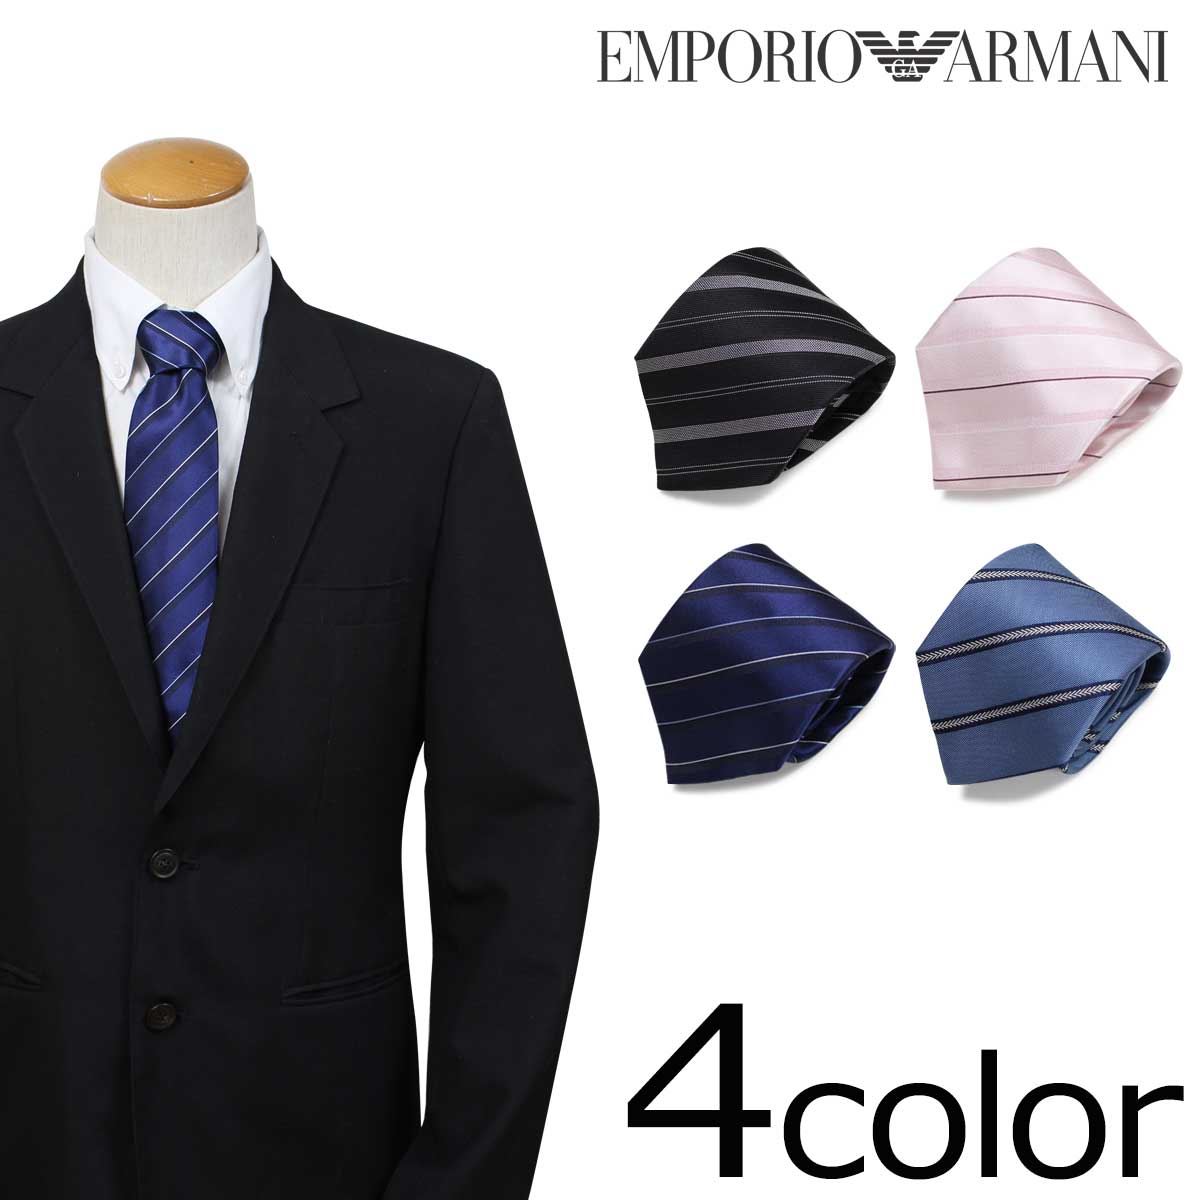 armani suits for wedding